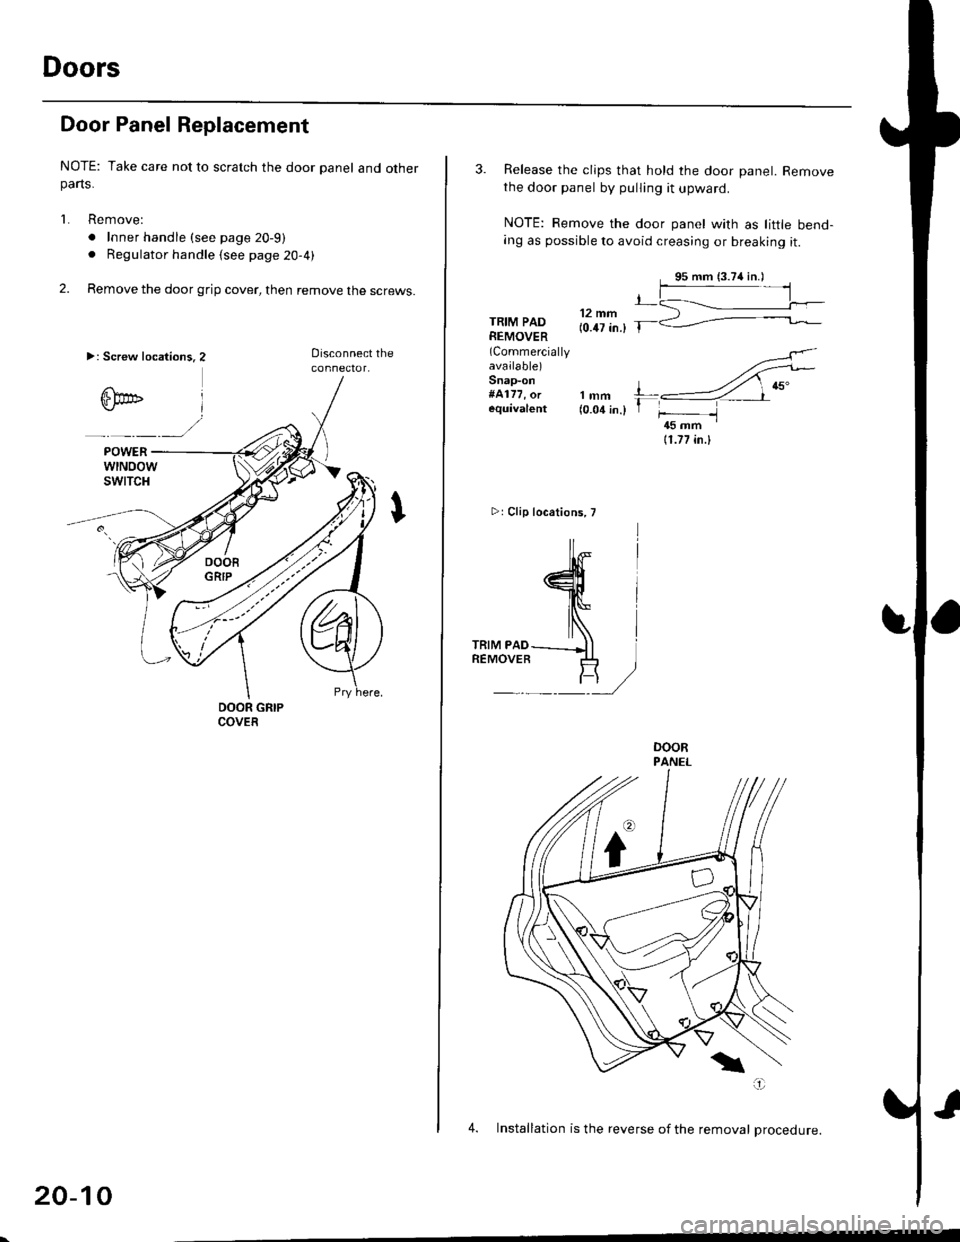 HONDA CIVIC 1996 6.G Workshop Manual Doors
Door Panel Replacement
NOTE: Take care not to scratch the door panel and otherparts.
1. Remove:
. Inner handle (see page 20-9)
. Regulator handle (see page 20-4)
2. Remove the door grip cover, t